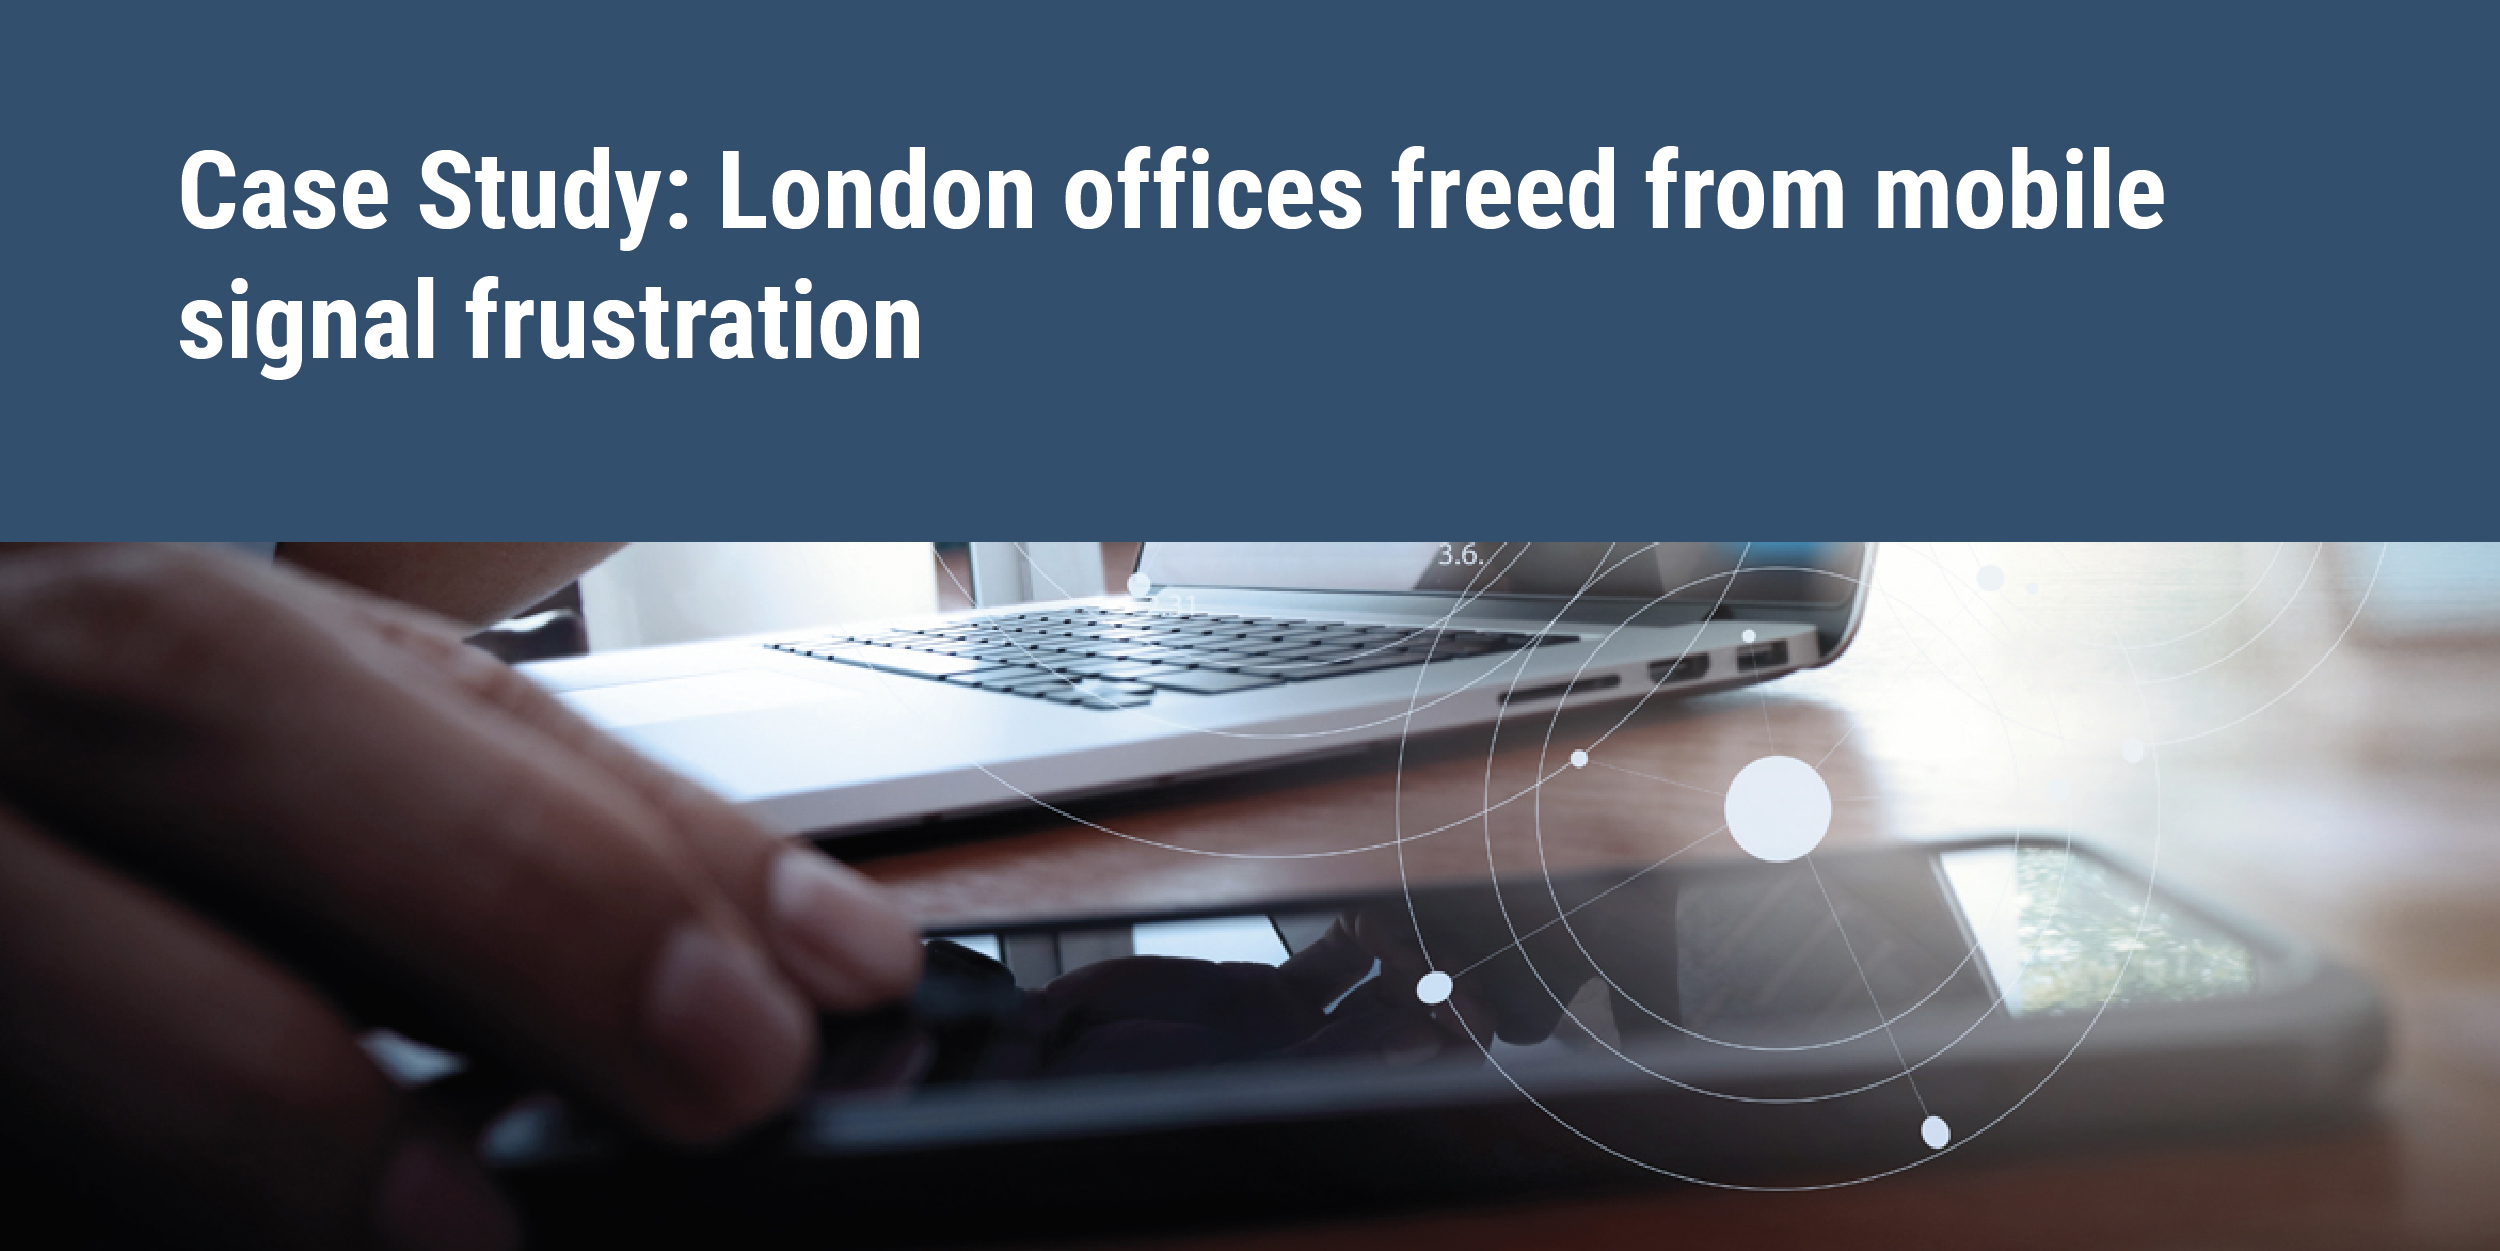 London Offices Freed From Mobile Signal Frustration - mobile phone and laptop